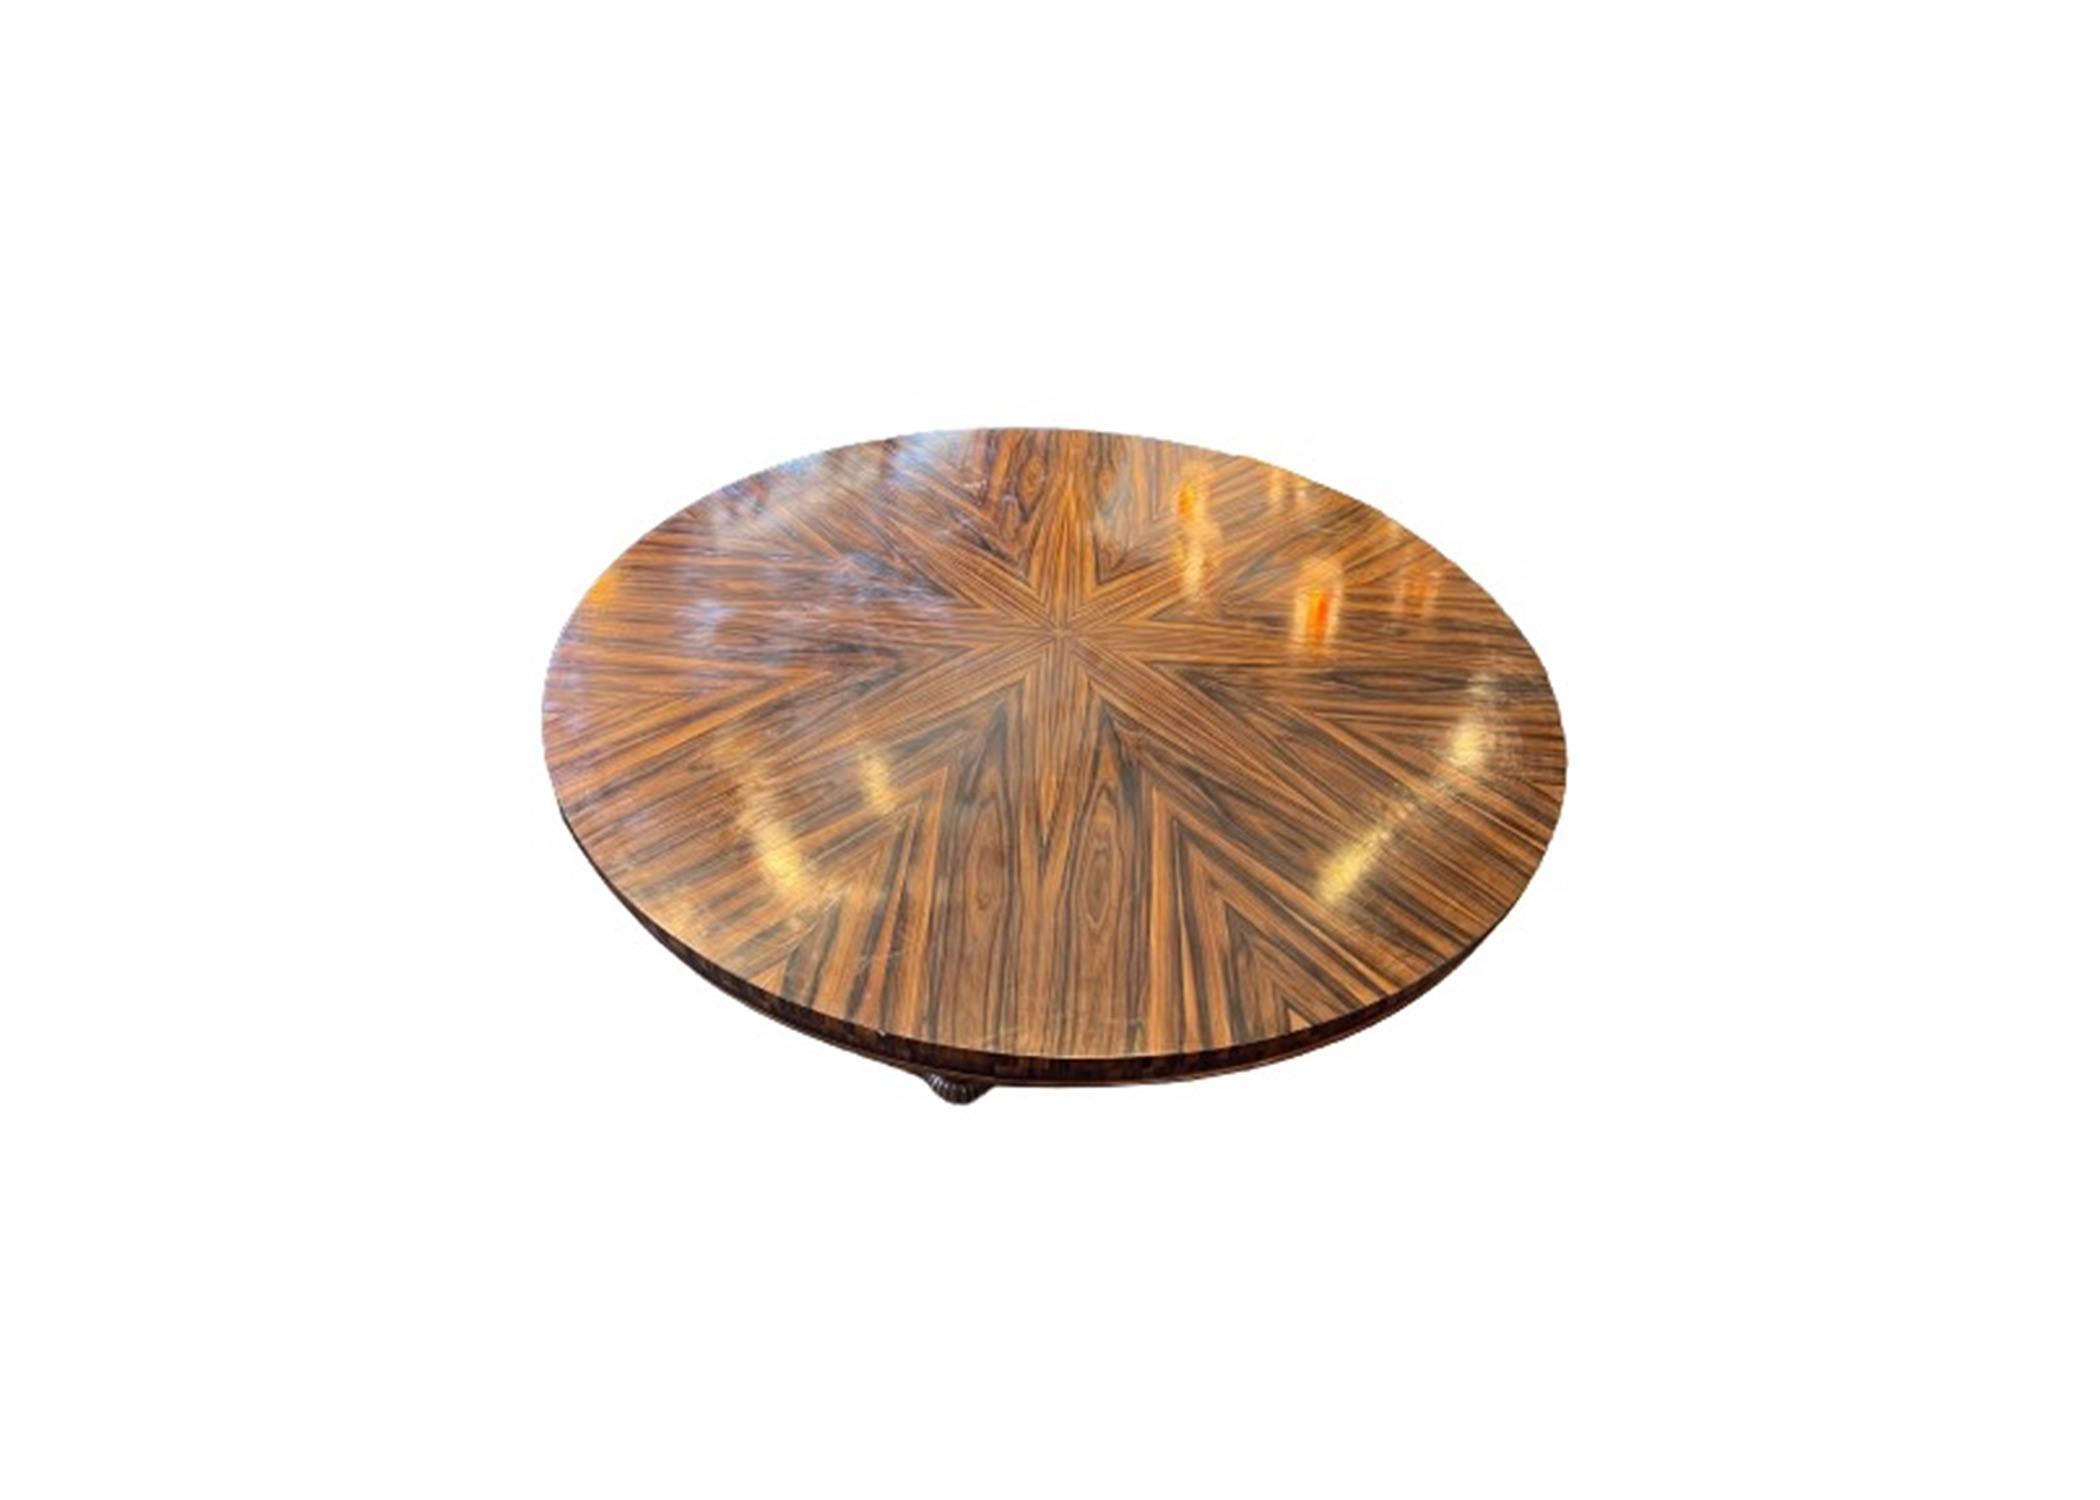 Regency Style Zebrawood Circular Dining Table, Modern- 30 1/2 x 6 ft. diam.

The Collection of Ann and Gordon Getty at STAIR: A Lifetime of Connoisseurship, Curiosity and Collecting, The Collection of Ann Getty.

Condition- In good overall condition